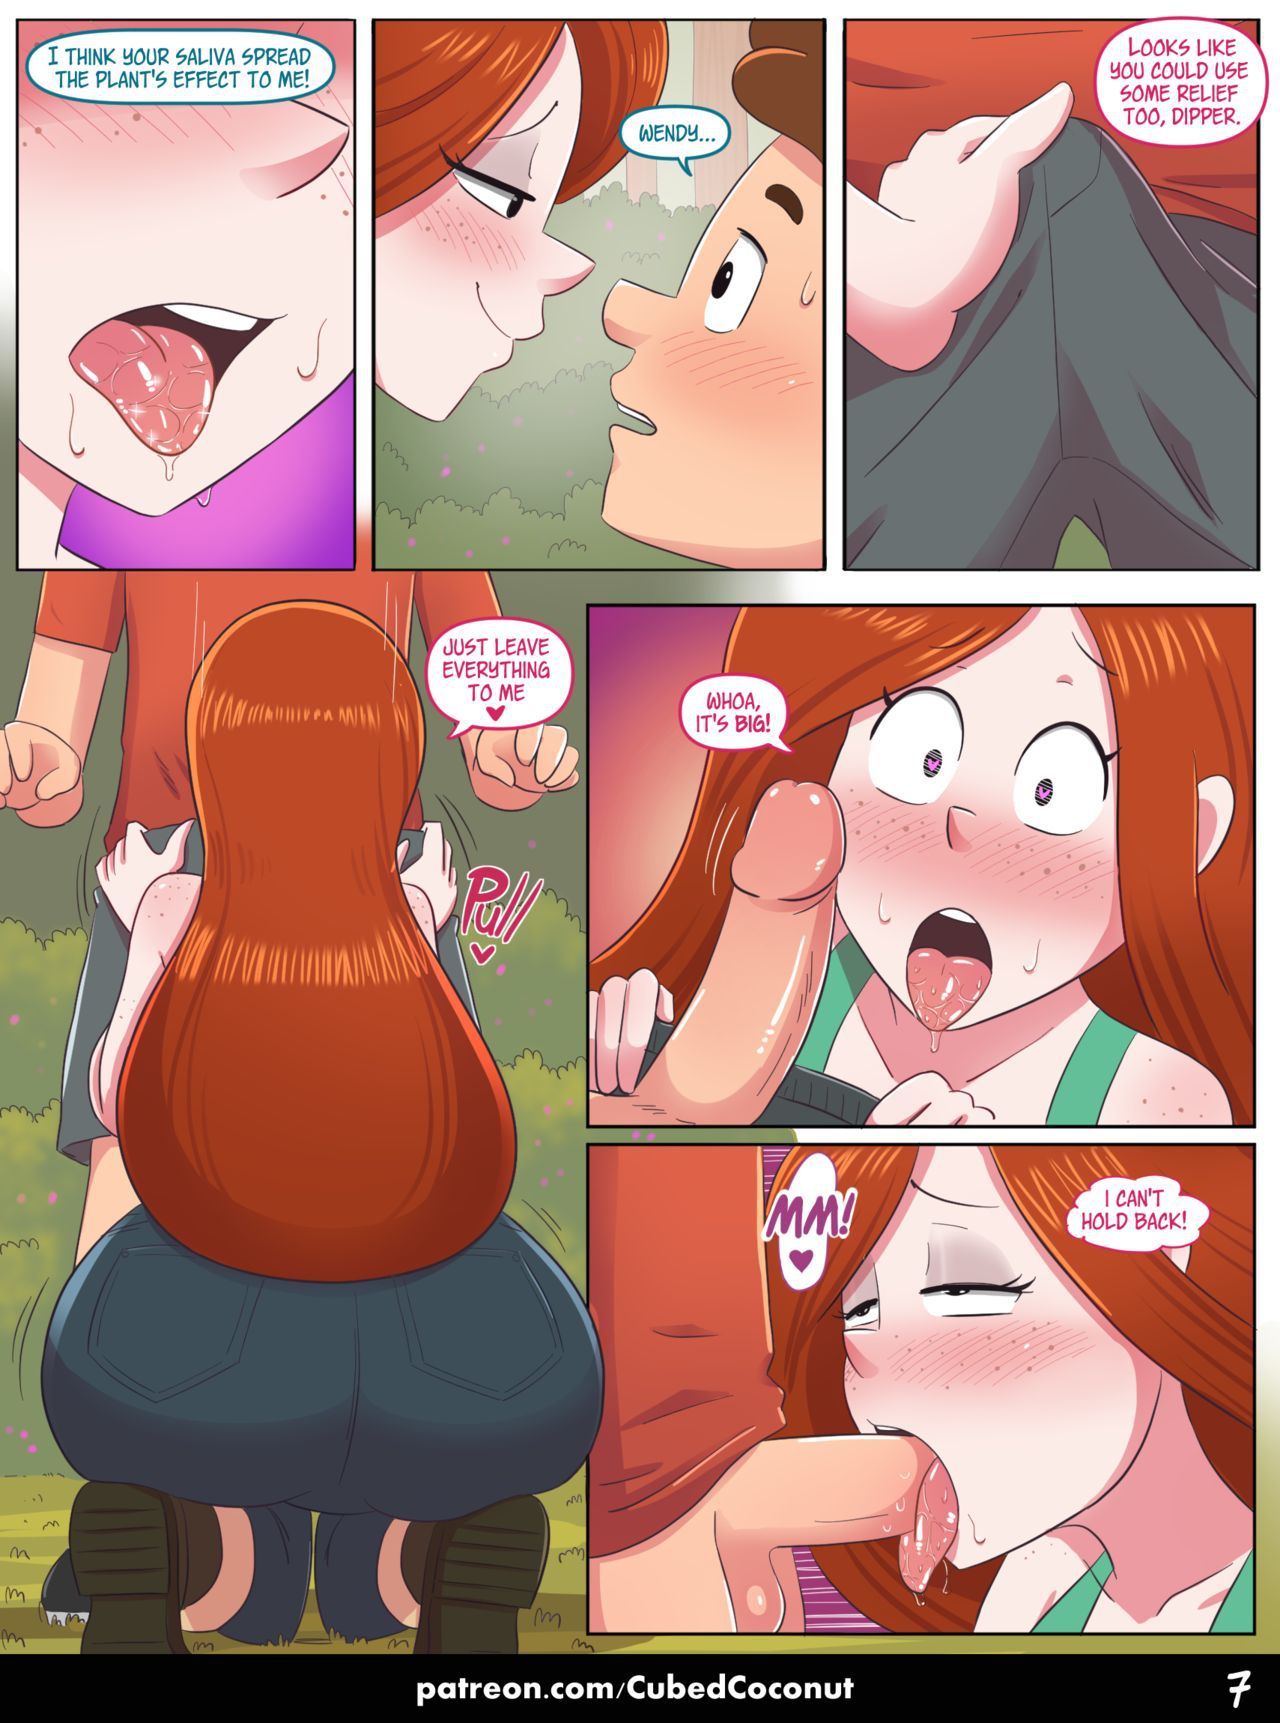 [Cubed Coconut] Wendy's Confession (Gravity Falls) [Ongoing] 8